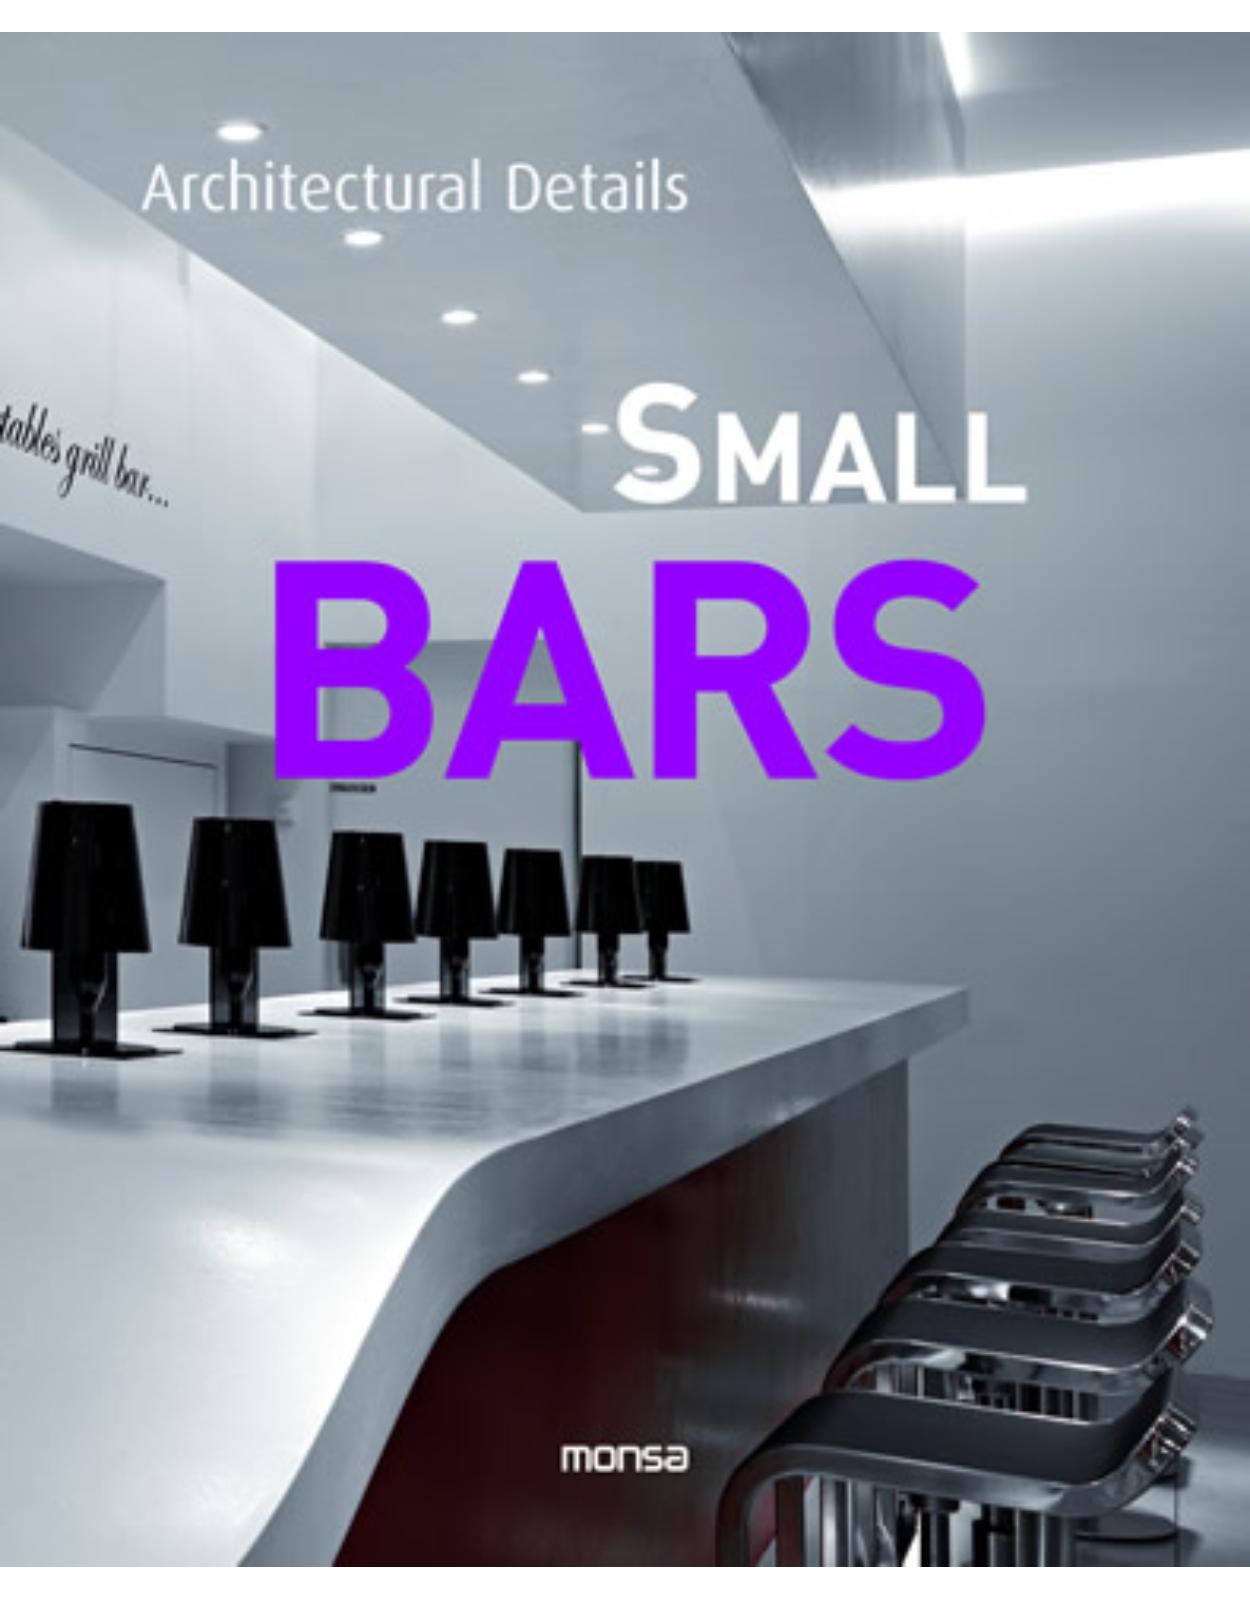 Small Bars (Architectural Details)